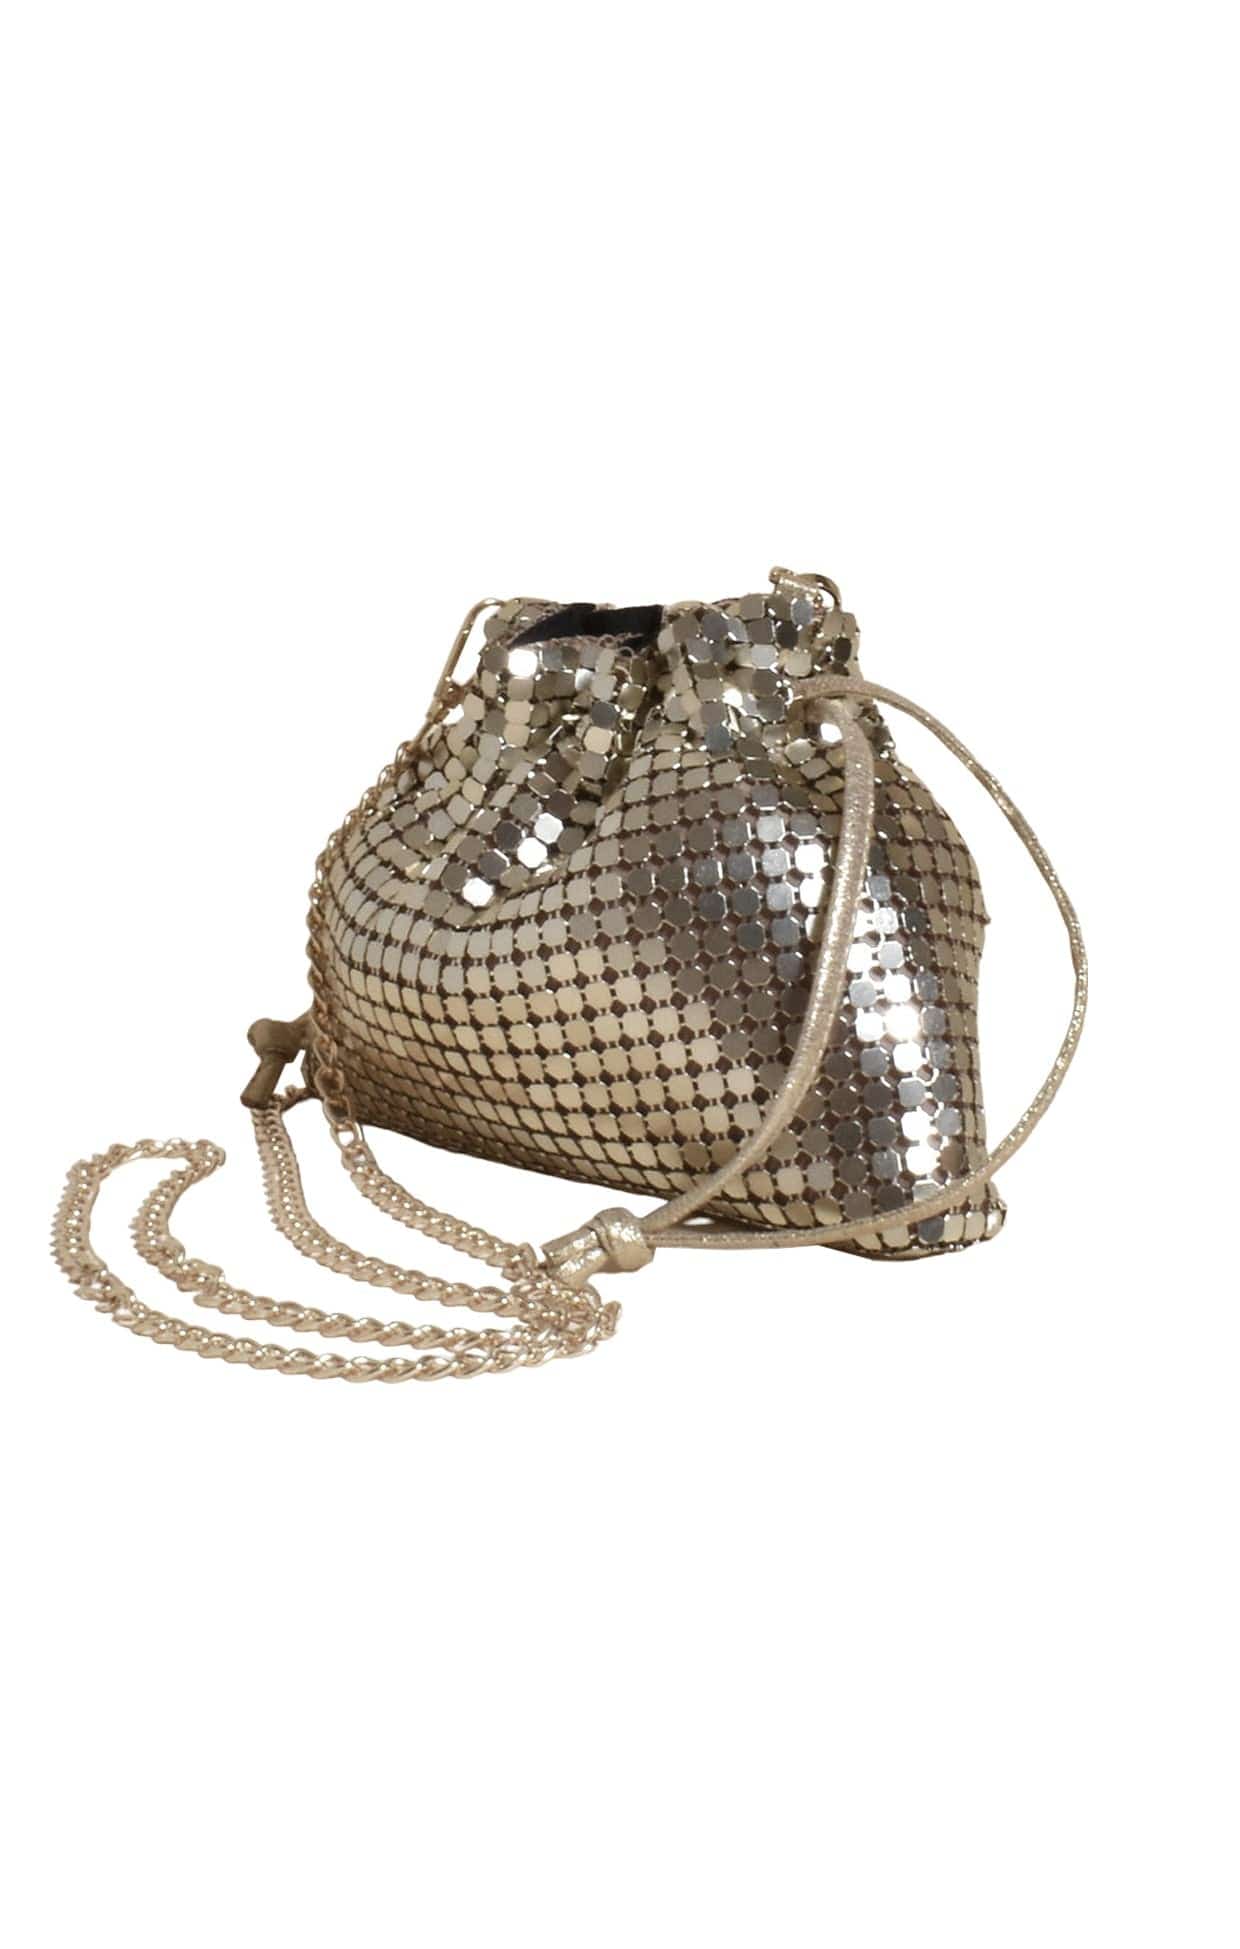 ACCESSORIES Bags Clutches One Size / Neutral KENZIE DRAWSTRING MESH EVENT BAG IN GOLD